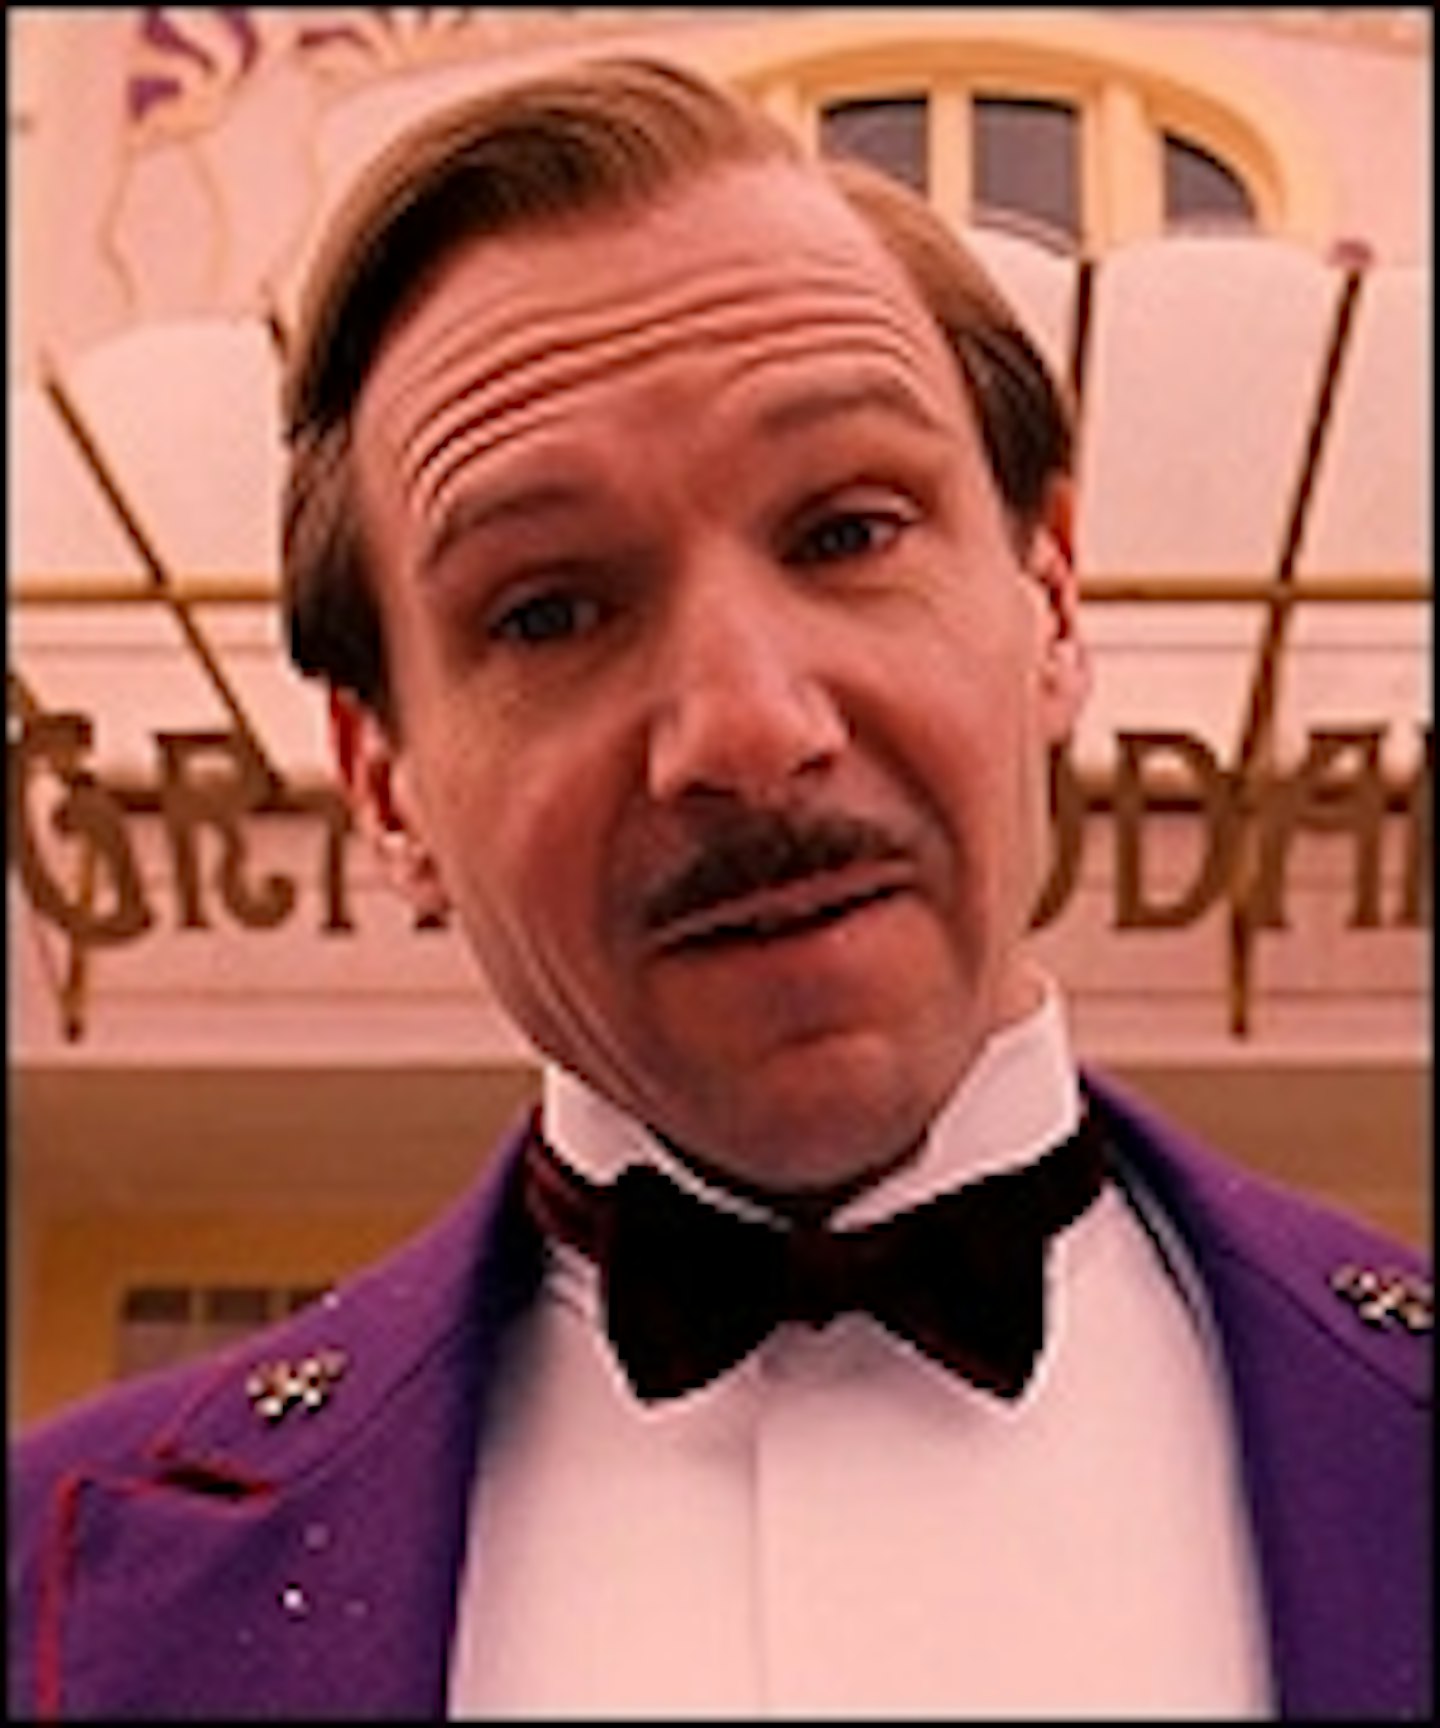 Latest Trailer For The Grand Budapest Hotel